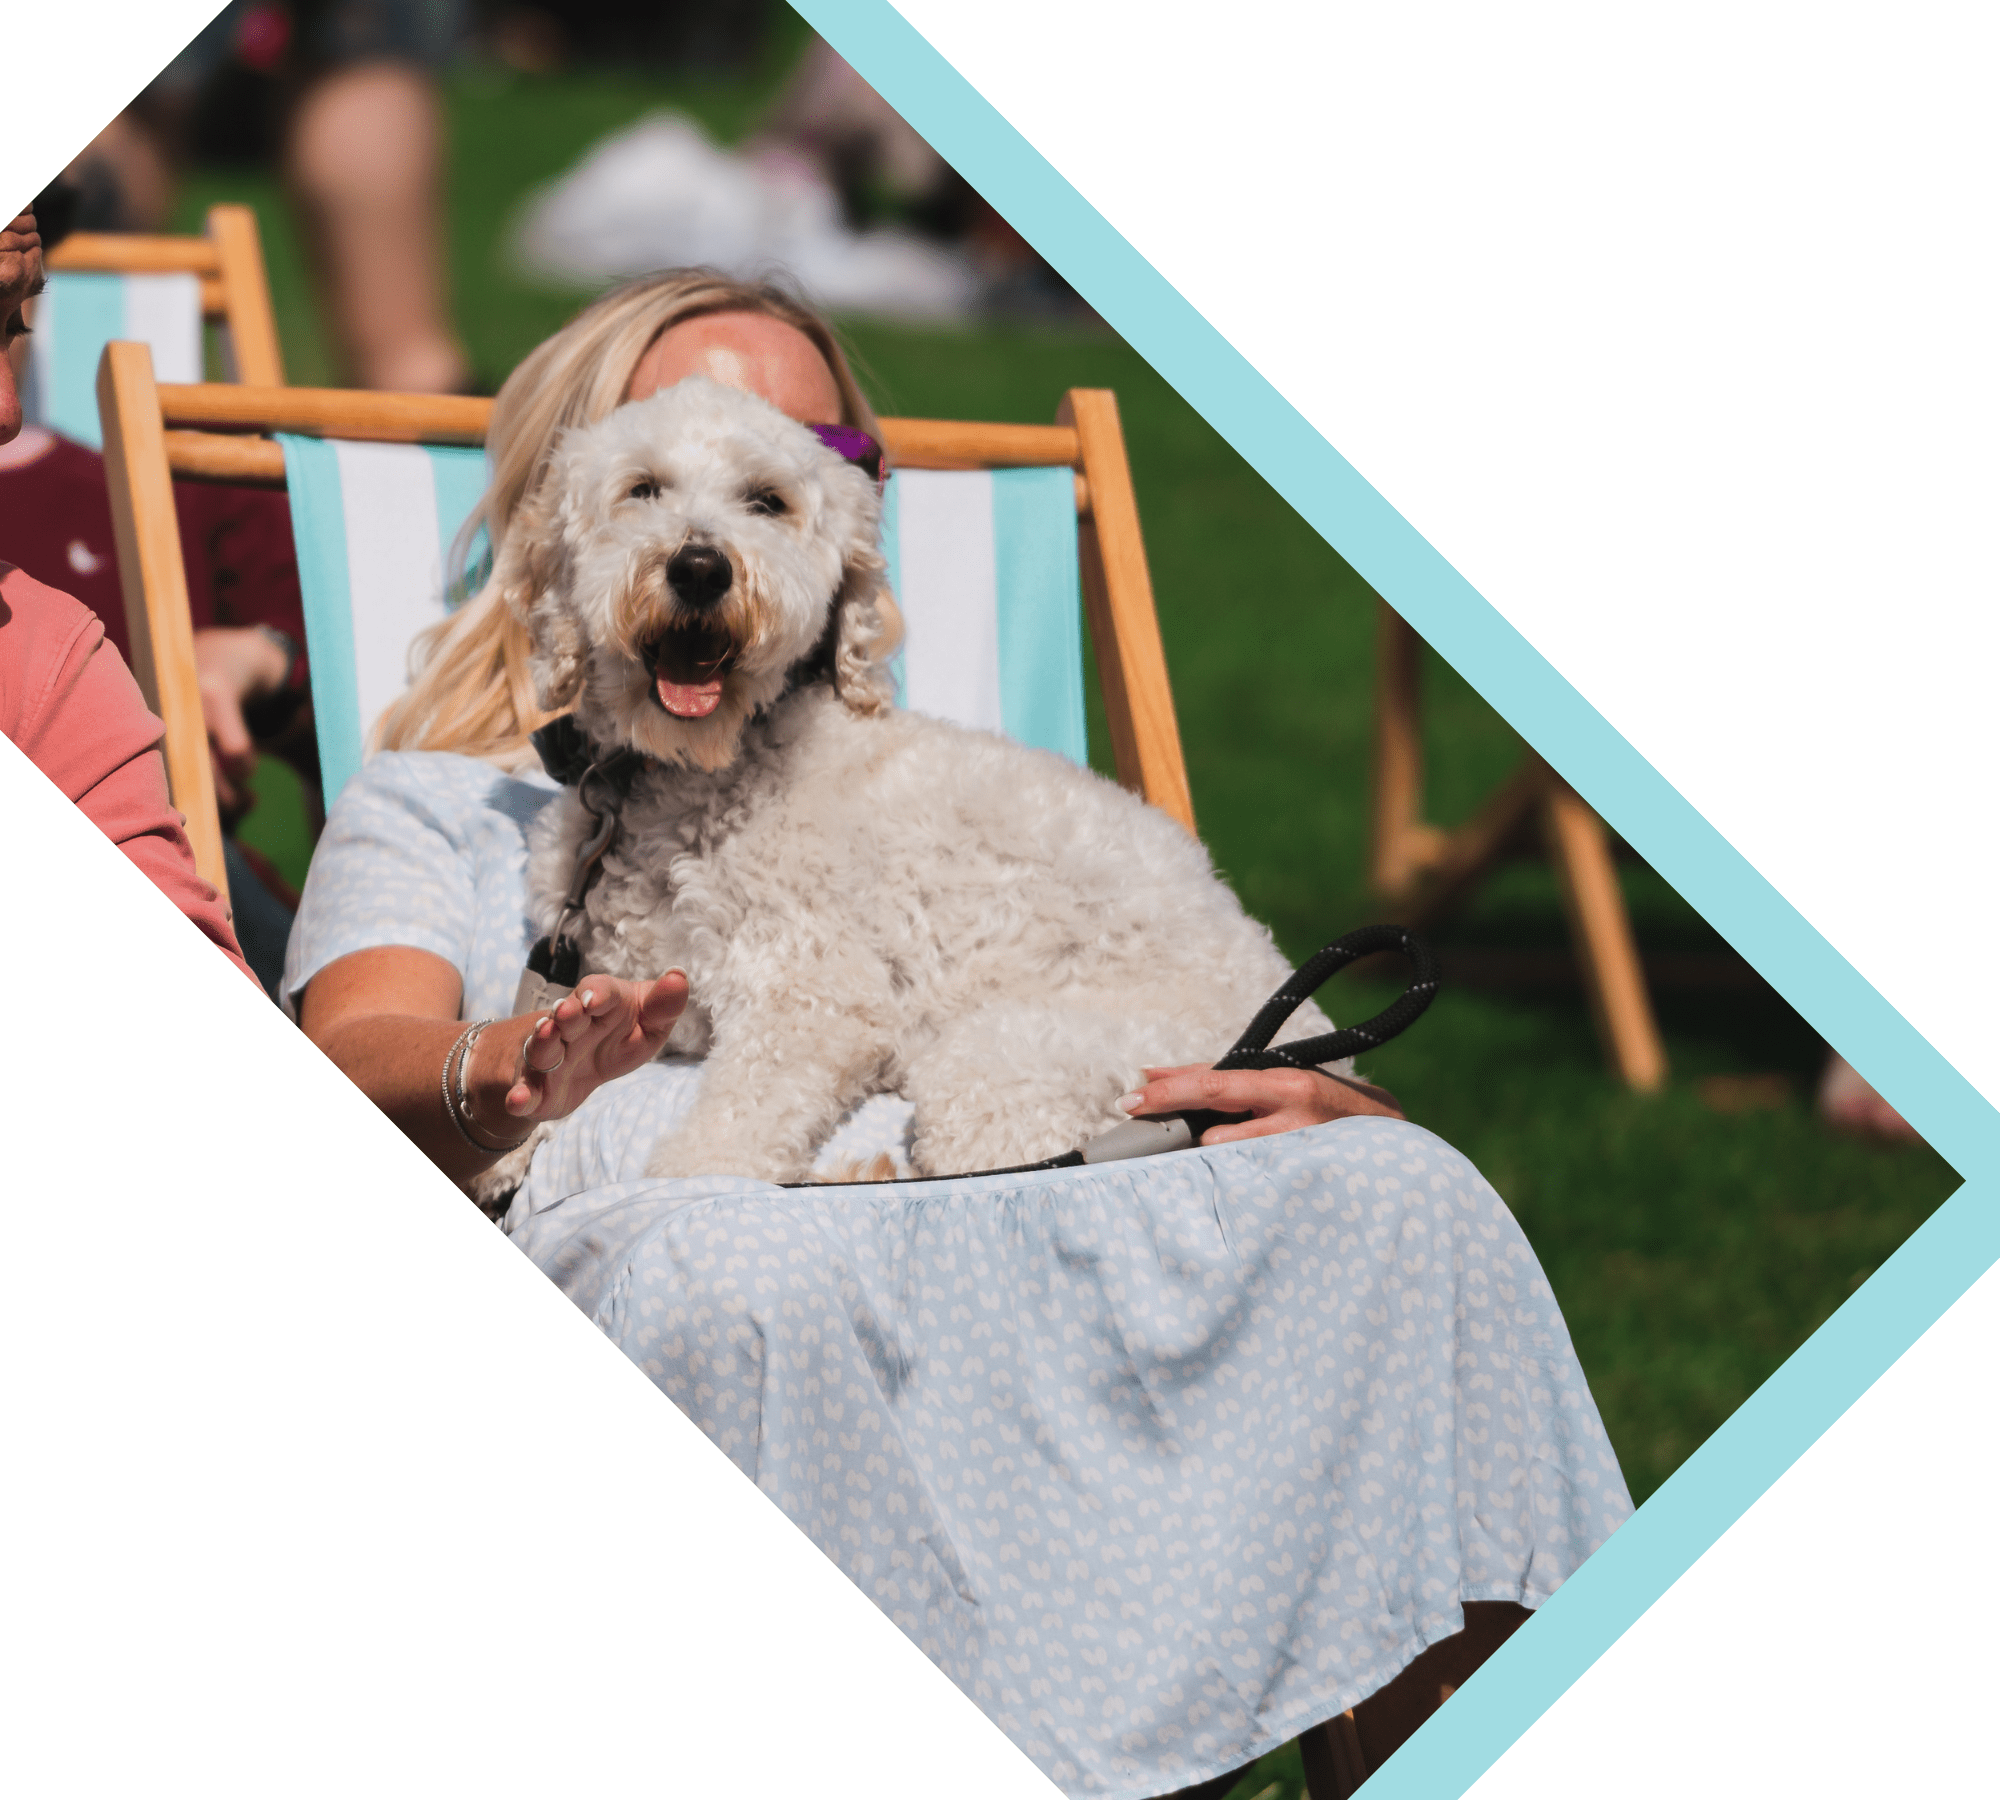 Dog friendly and plenty of deckchairs to relax and enjoy the live music and taste the delicious street food from around the world